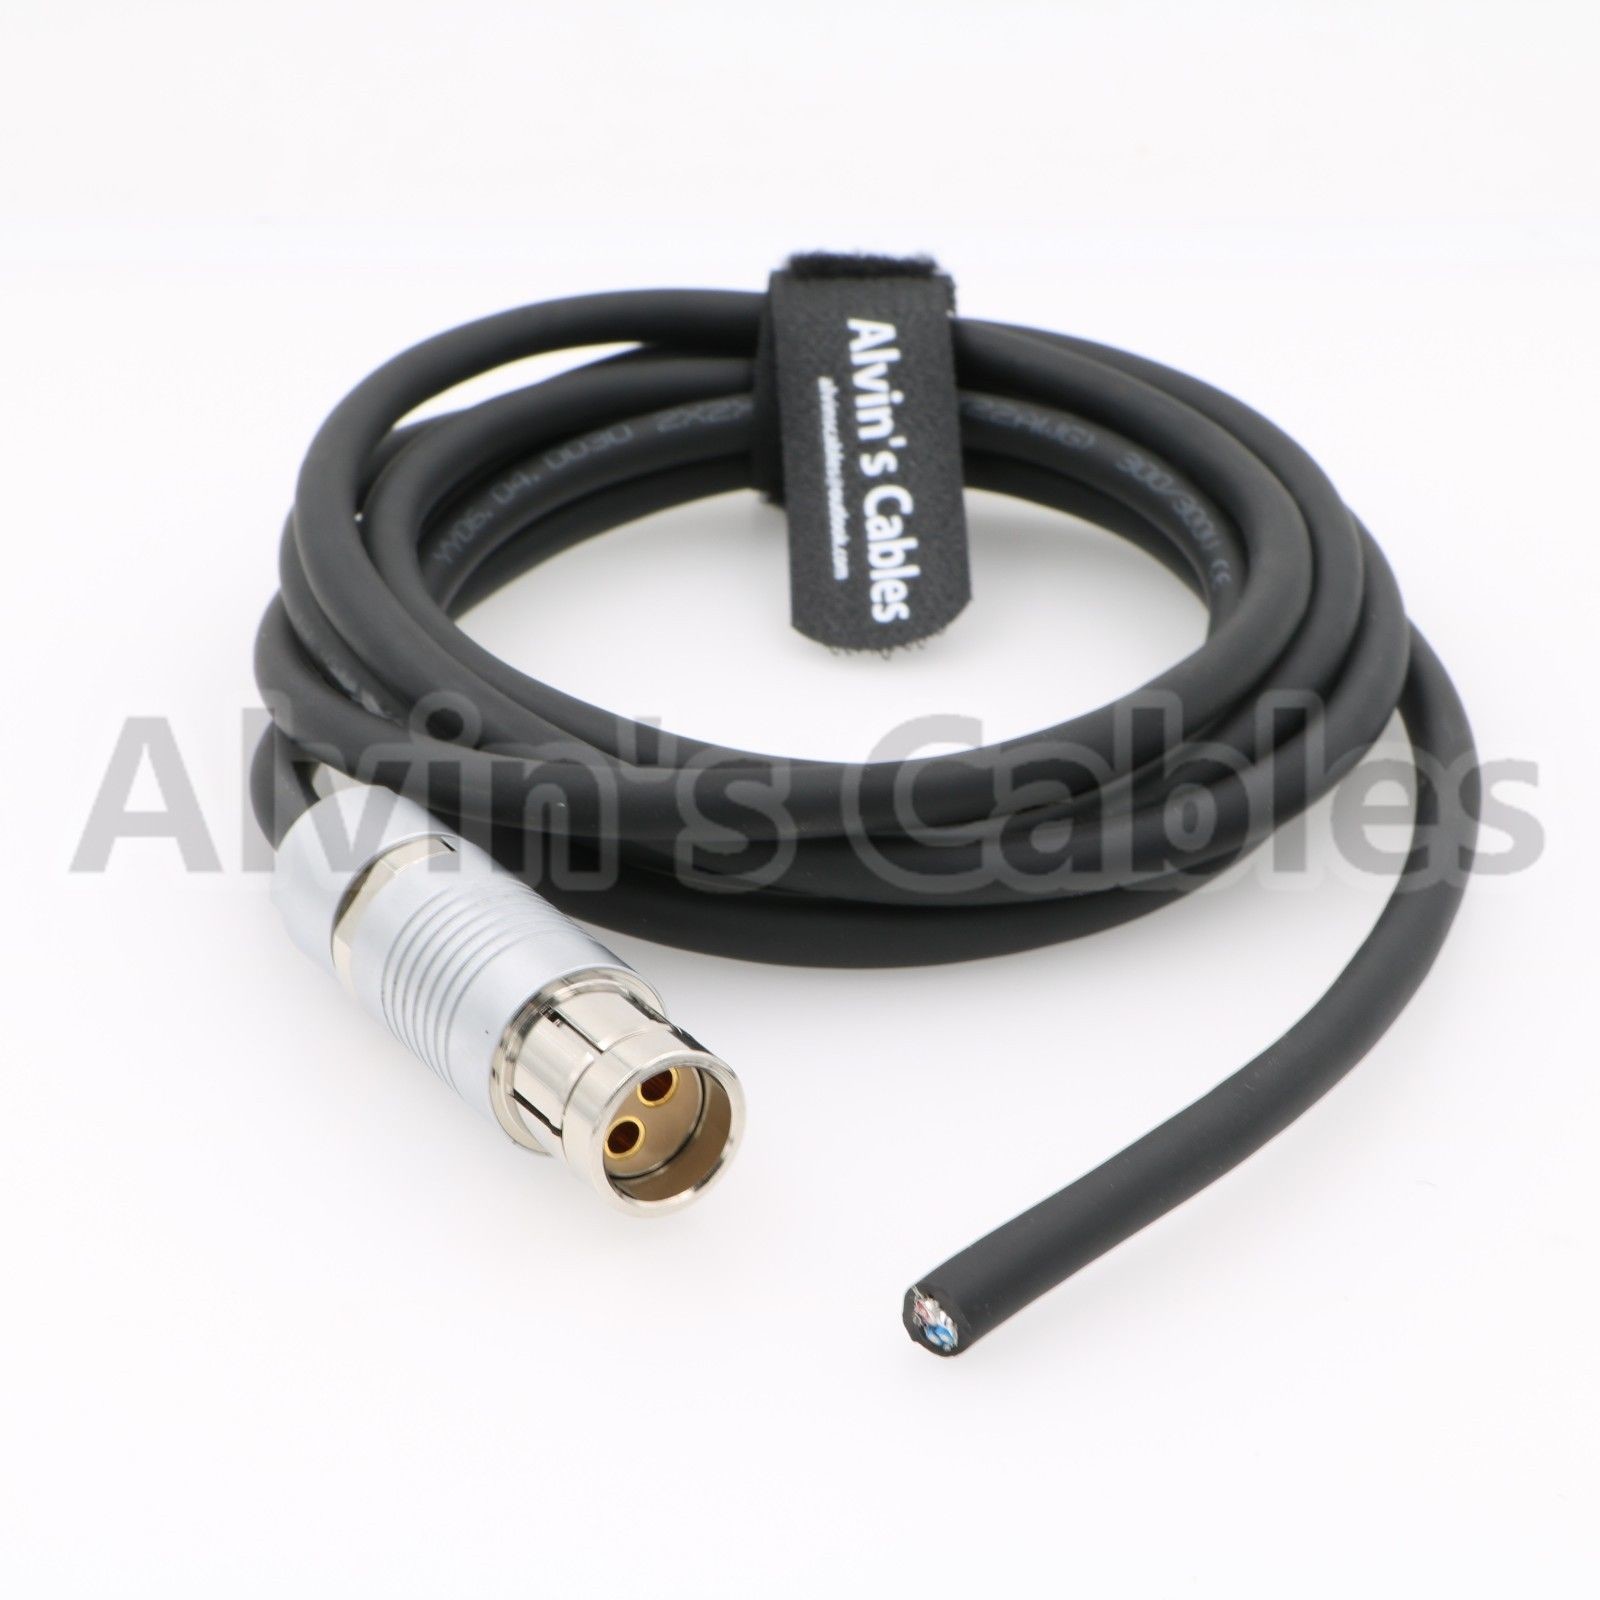 Arri Alexa Power Cable Camera Power Cable Fischer 2 Pin Female 